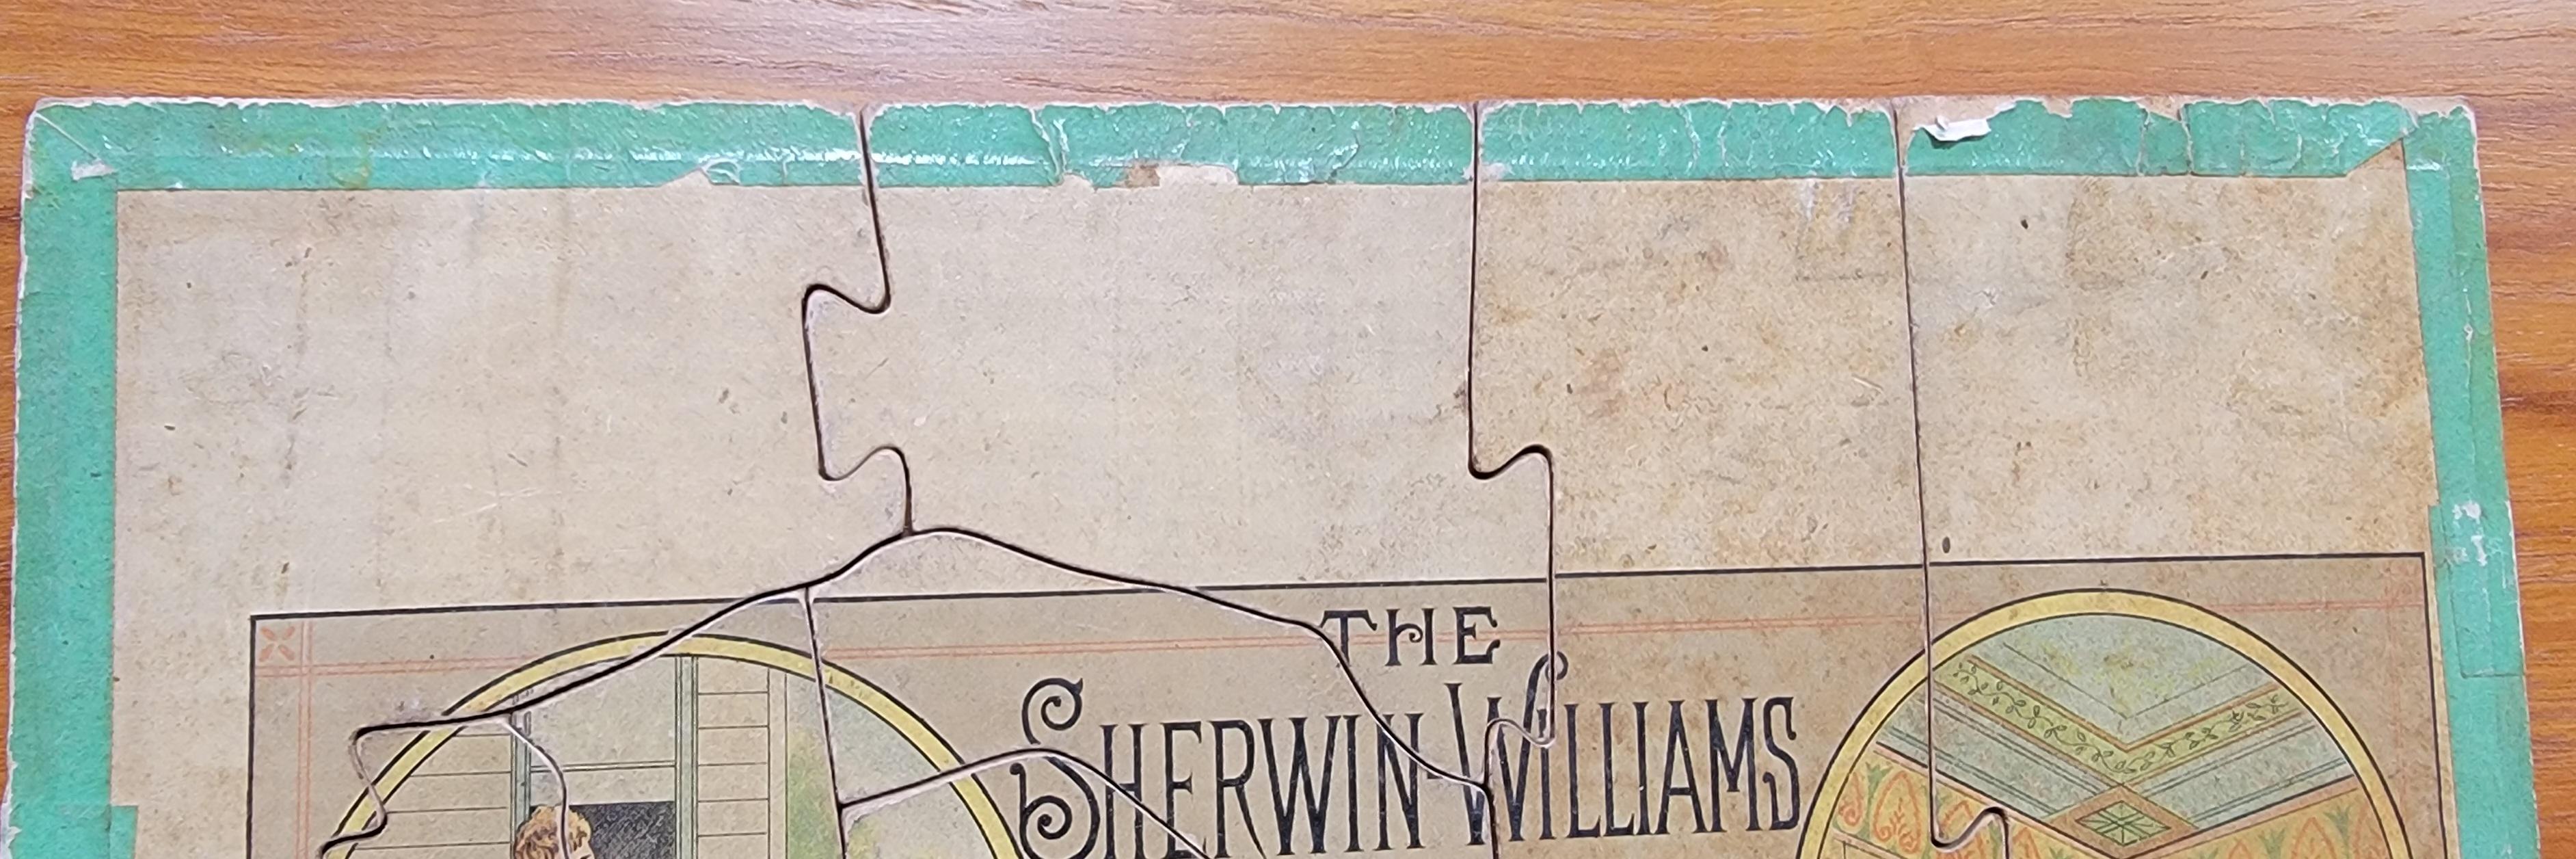 American Advertising Puzzle USA Map Sherwin Williams Paint, 19th Century For Sale